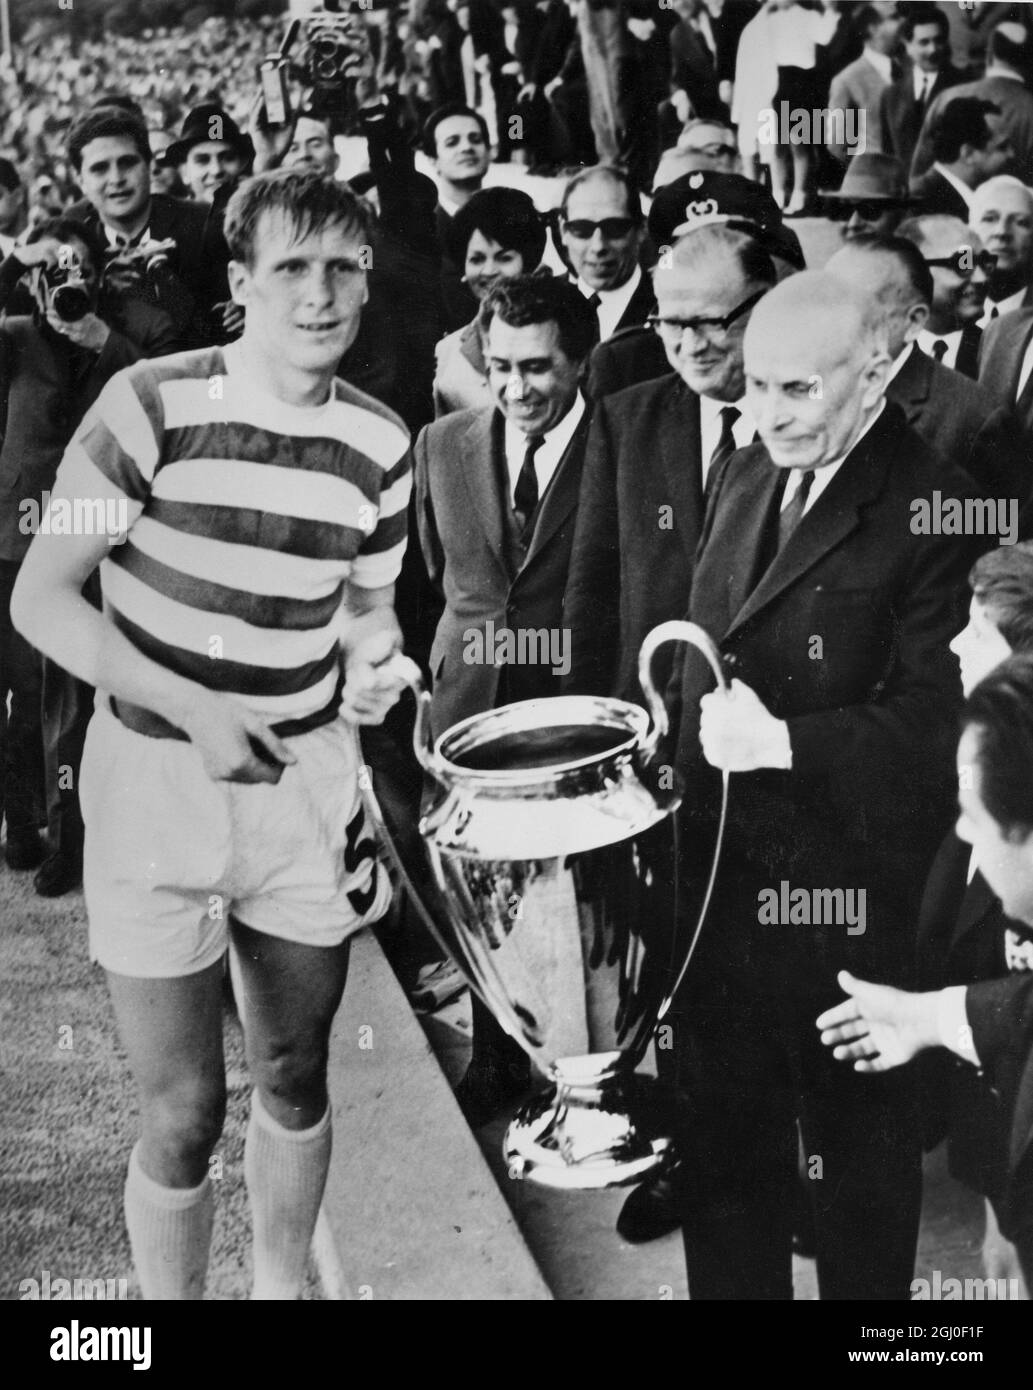 Celtic pay tribute to Grande Inter in 1967 European Cup anniversary shirt